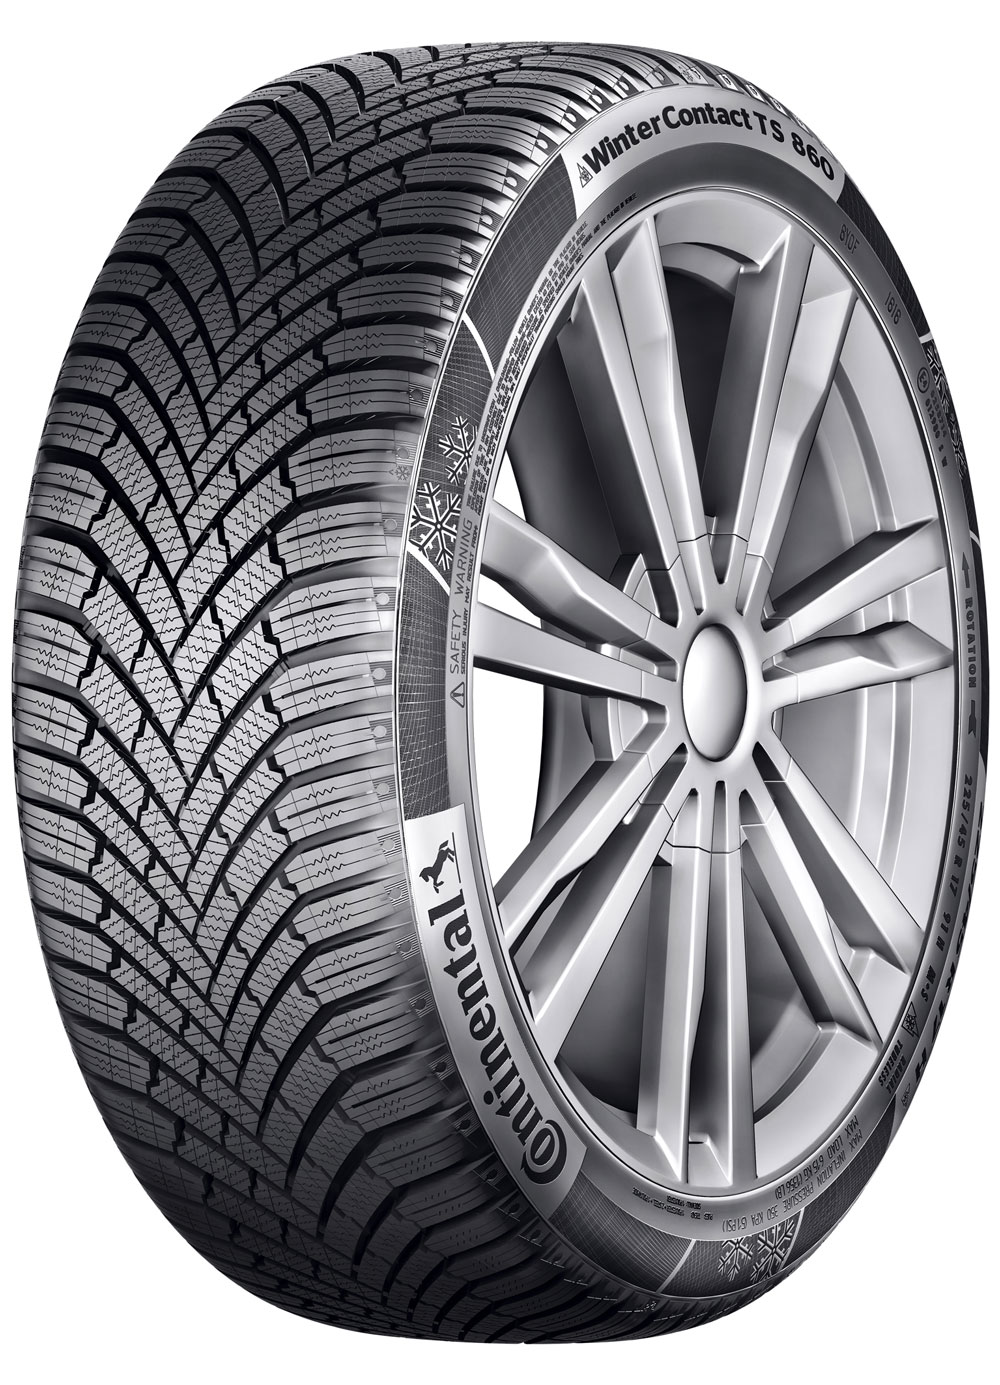 Anvelopa Iarna Continental Winter Contact Ts860 165/60R15 77T